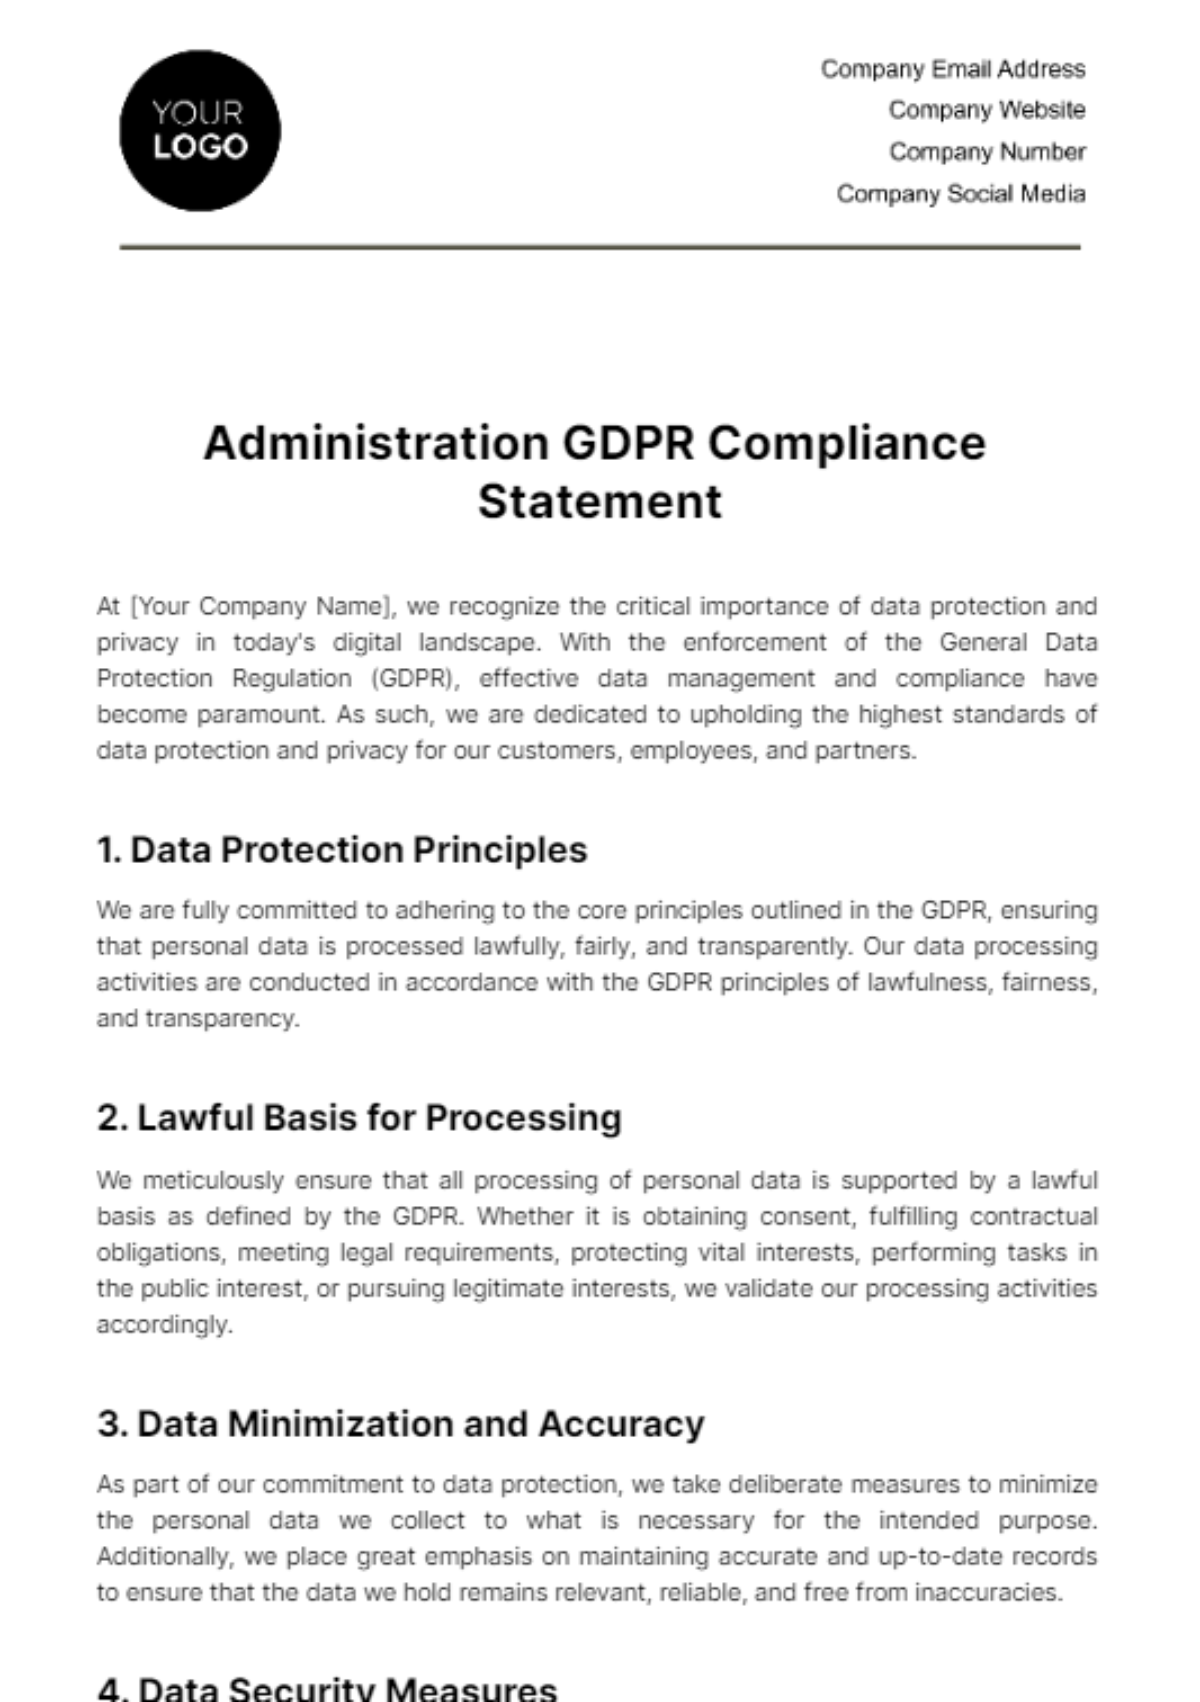 Free Administration GDPR Compliance Statement Template